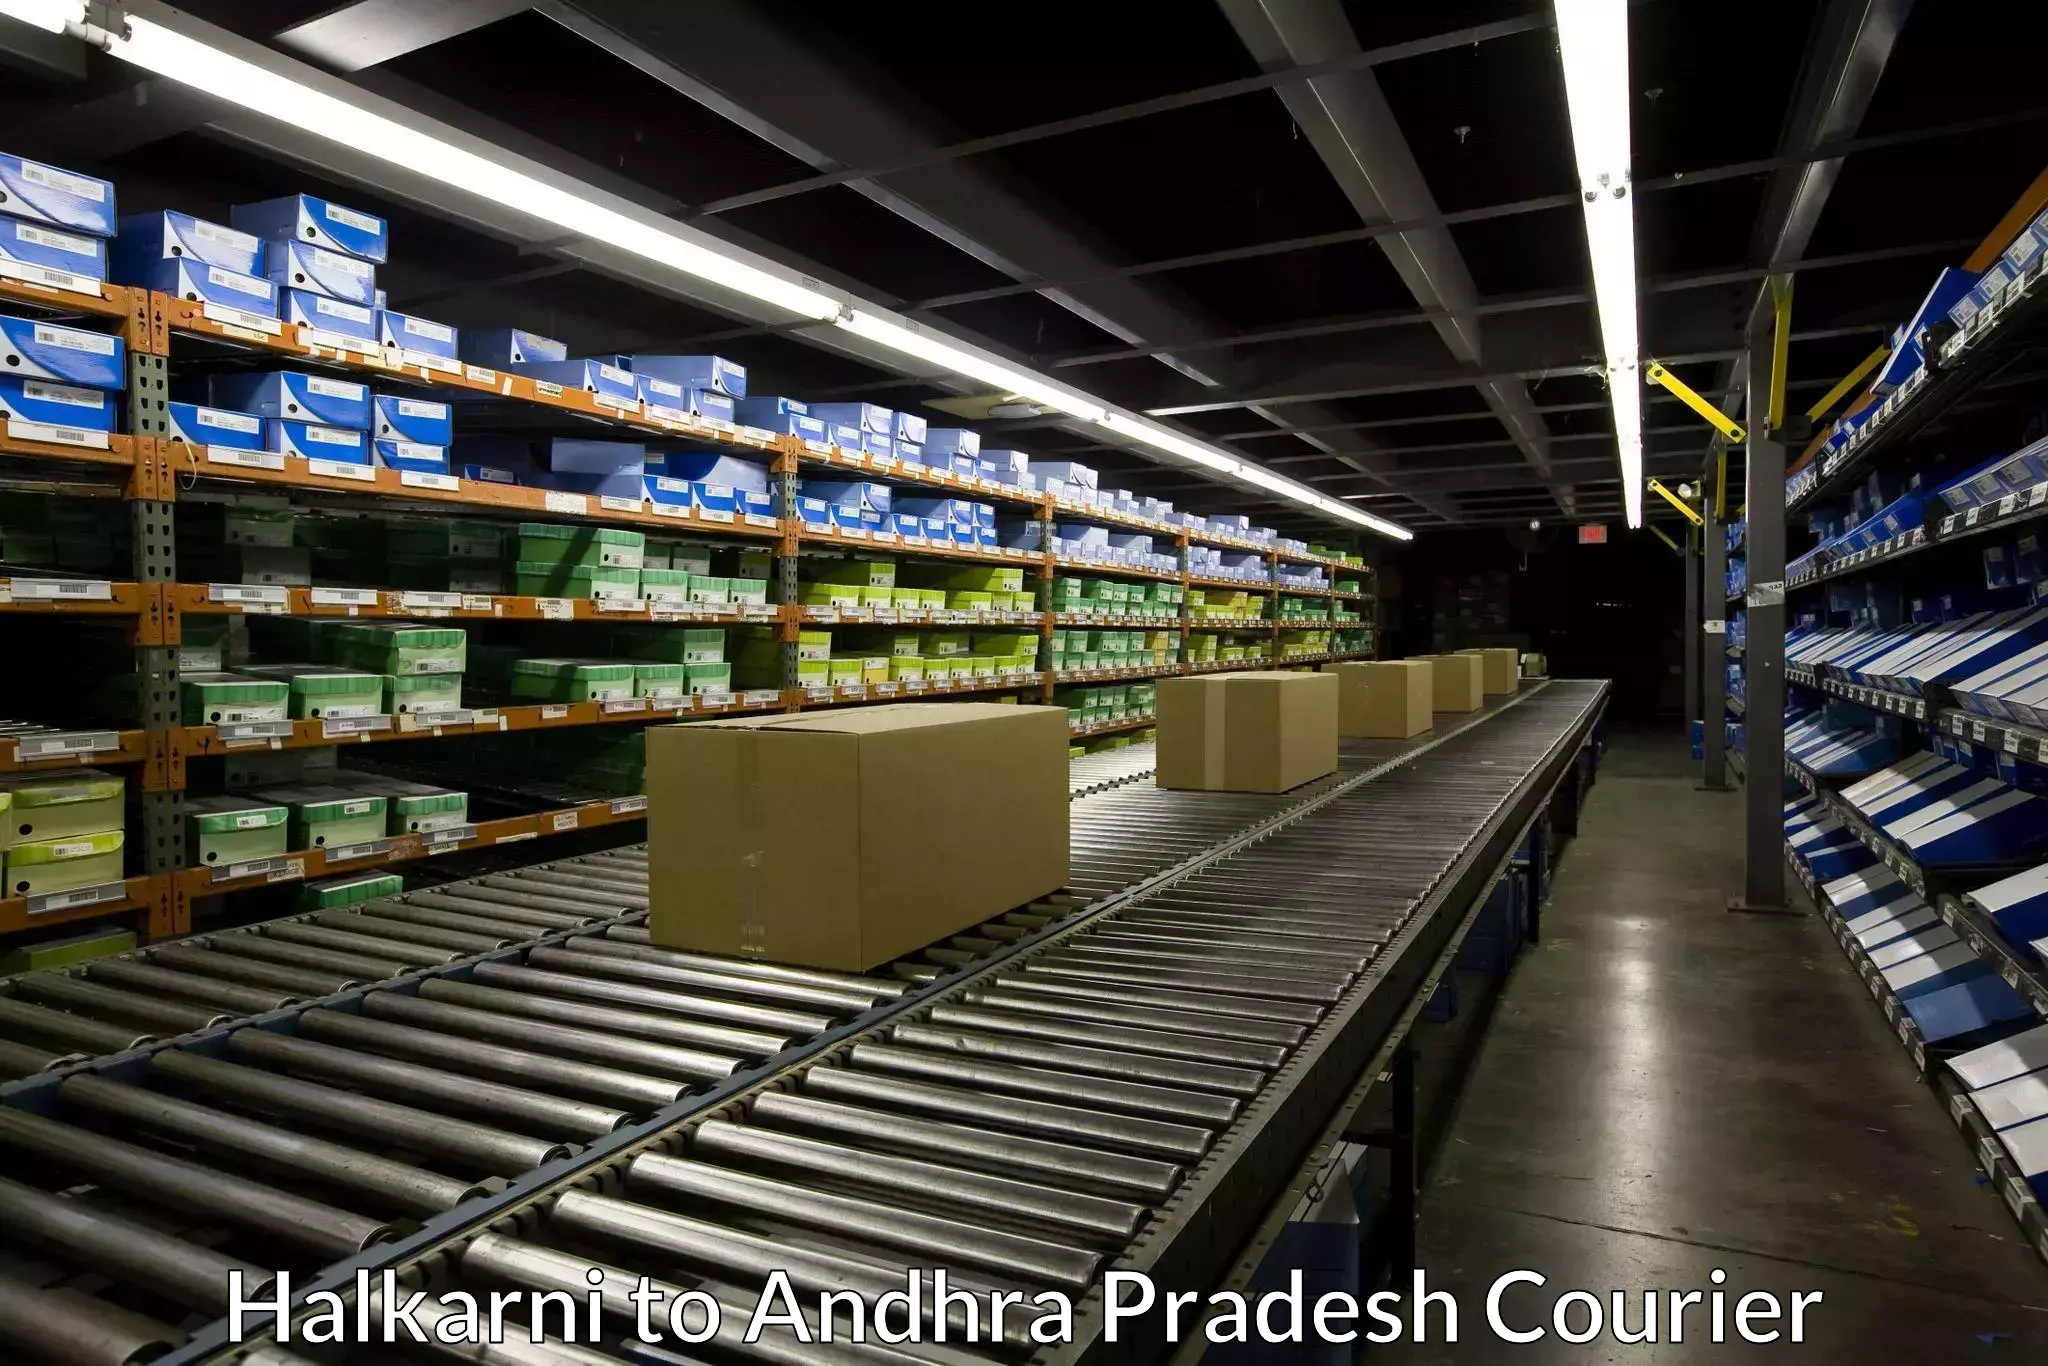 State-of-the-art courier technology Halkarni to Andhra Pradesh